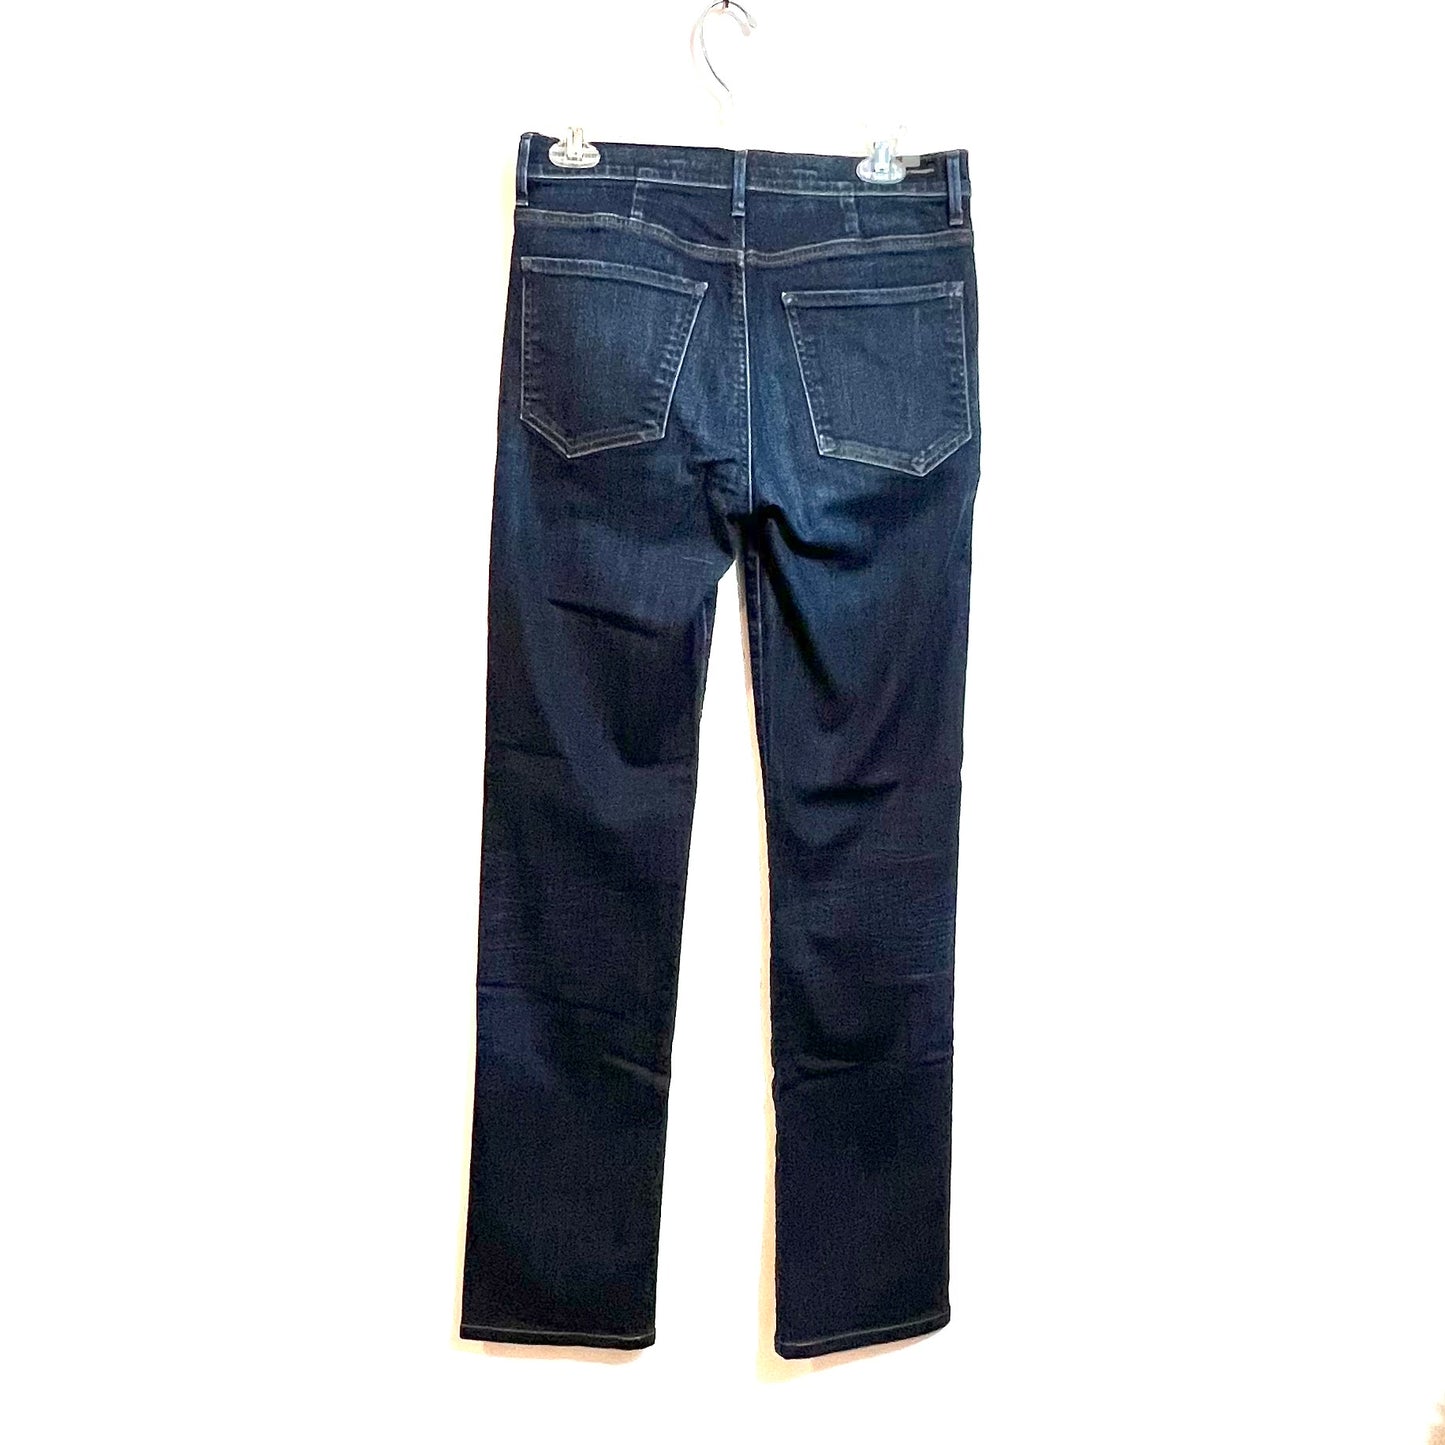 Citizens of Humanity Arley Highrise Straight Leg Jeans